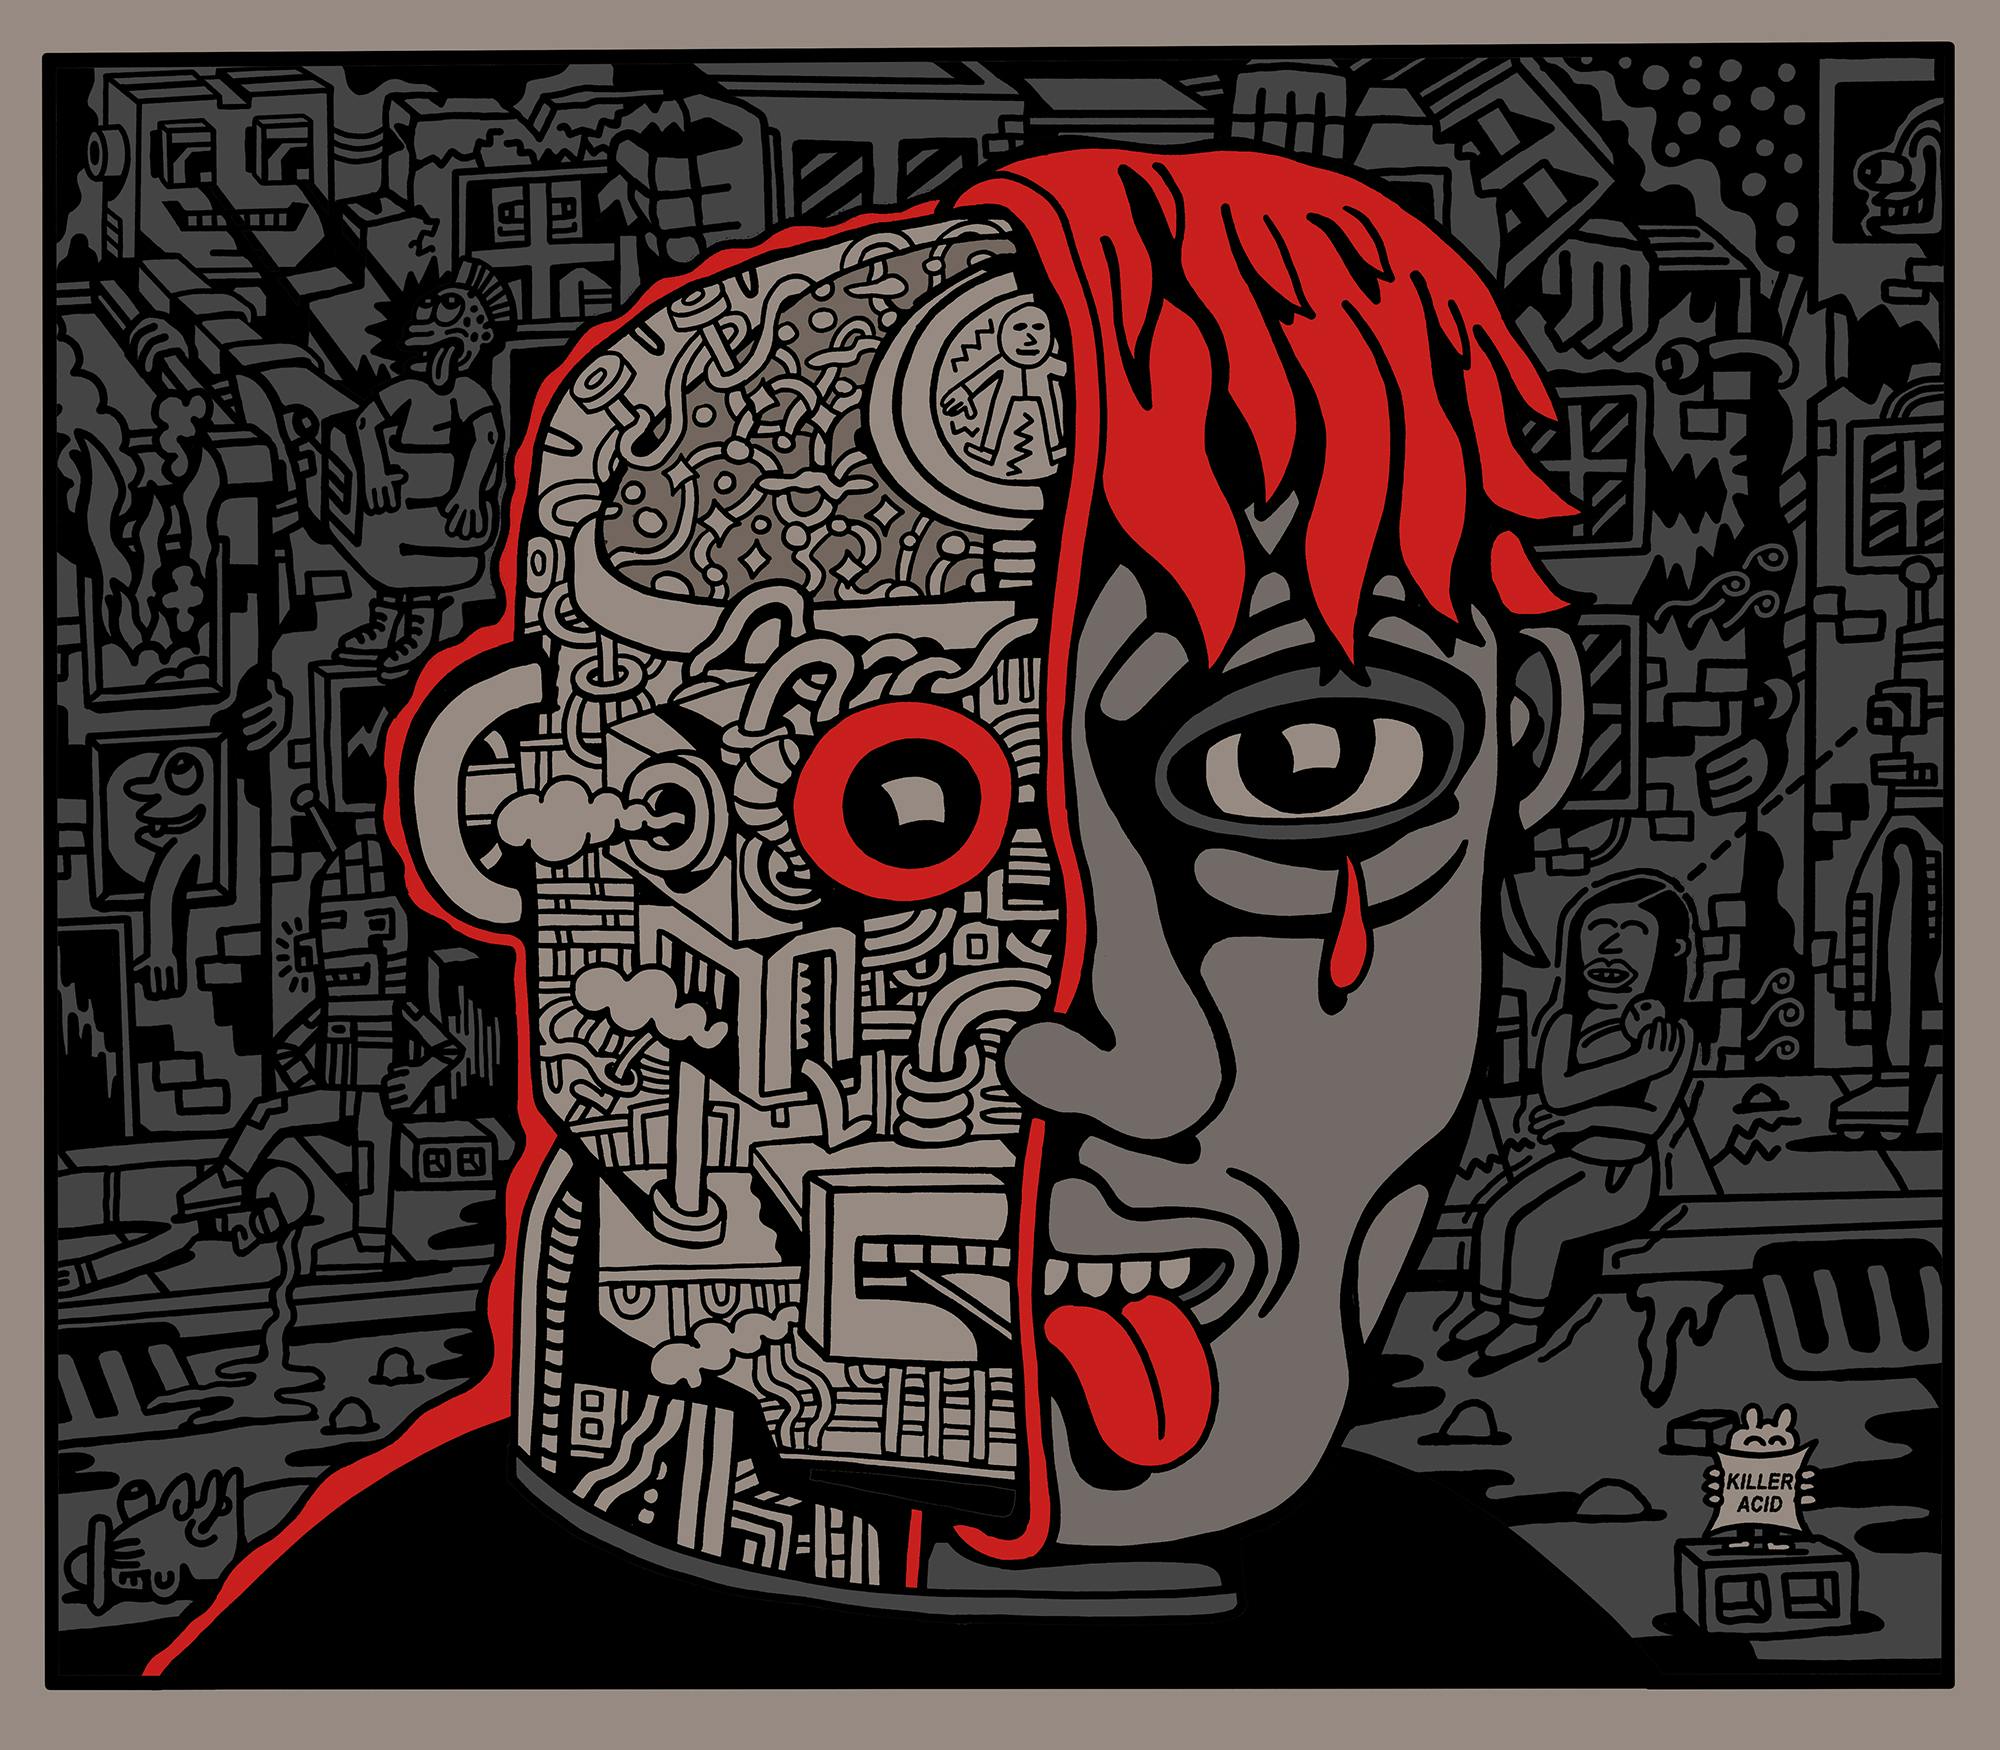 Presented by PROOF in Grails III, a work of art created by Killer Acid titled Man Machine.